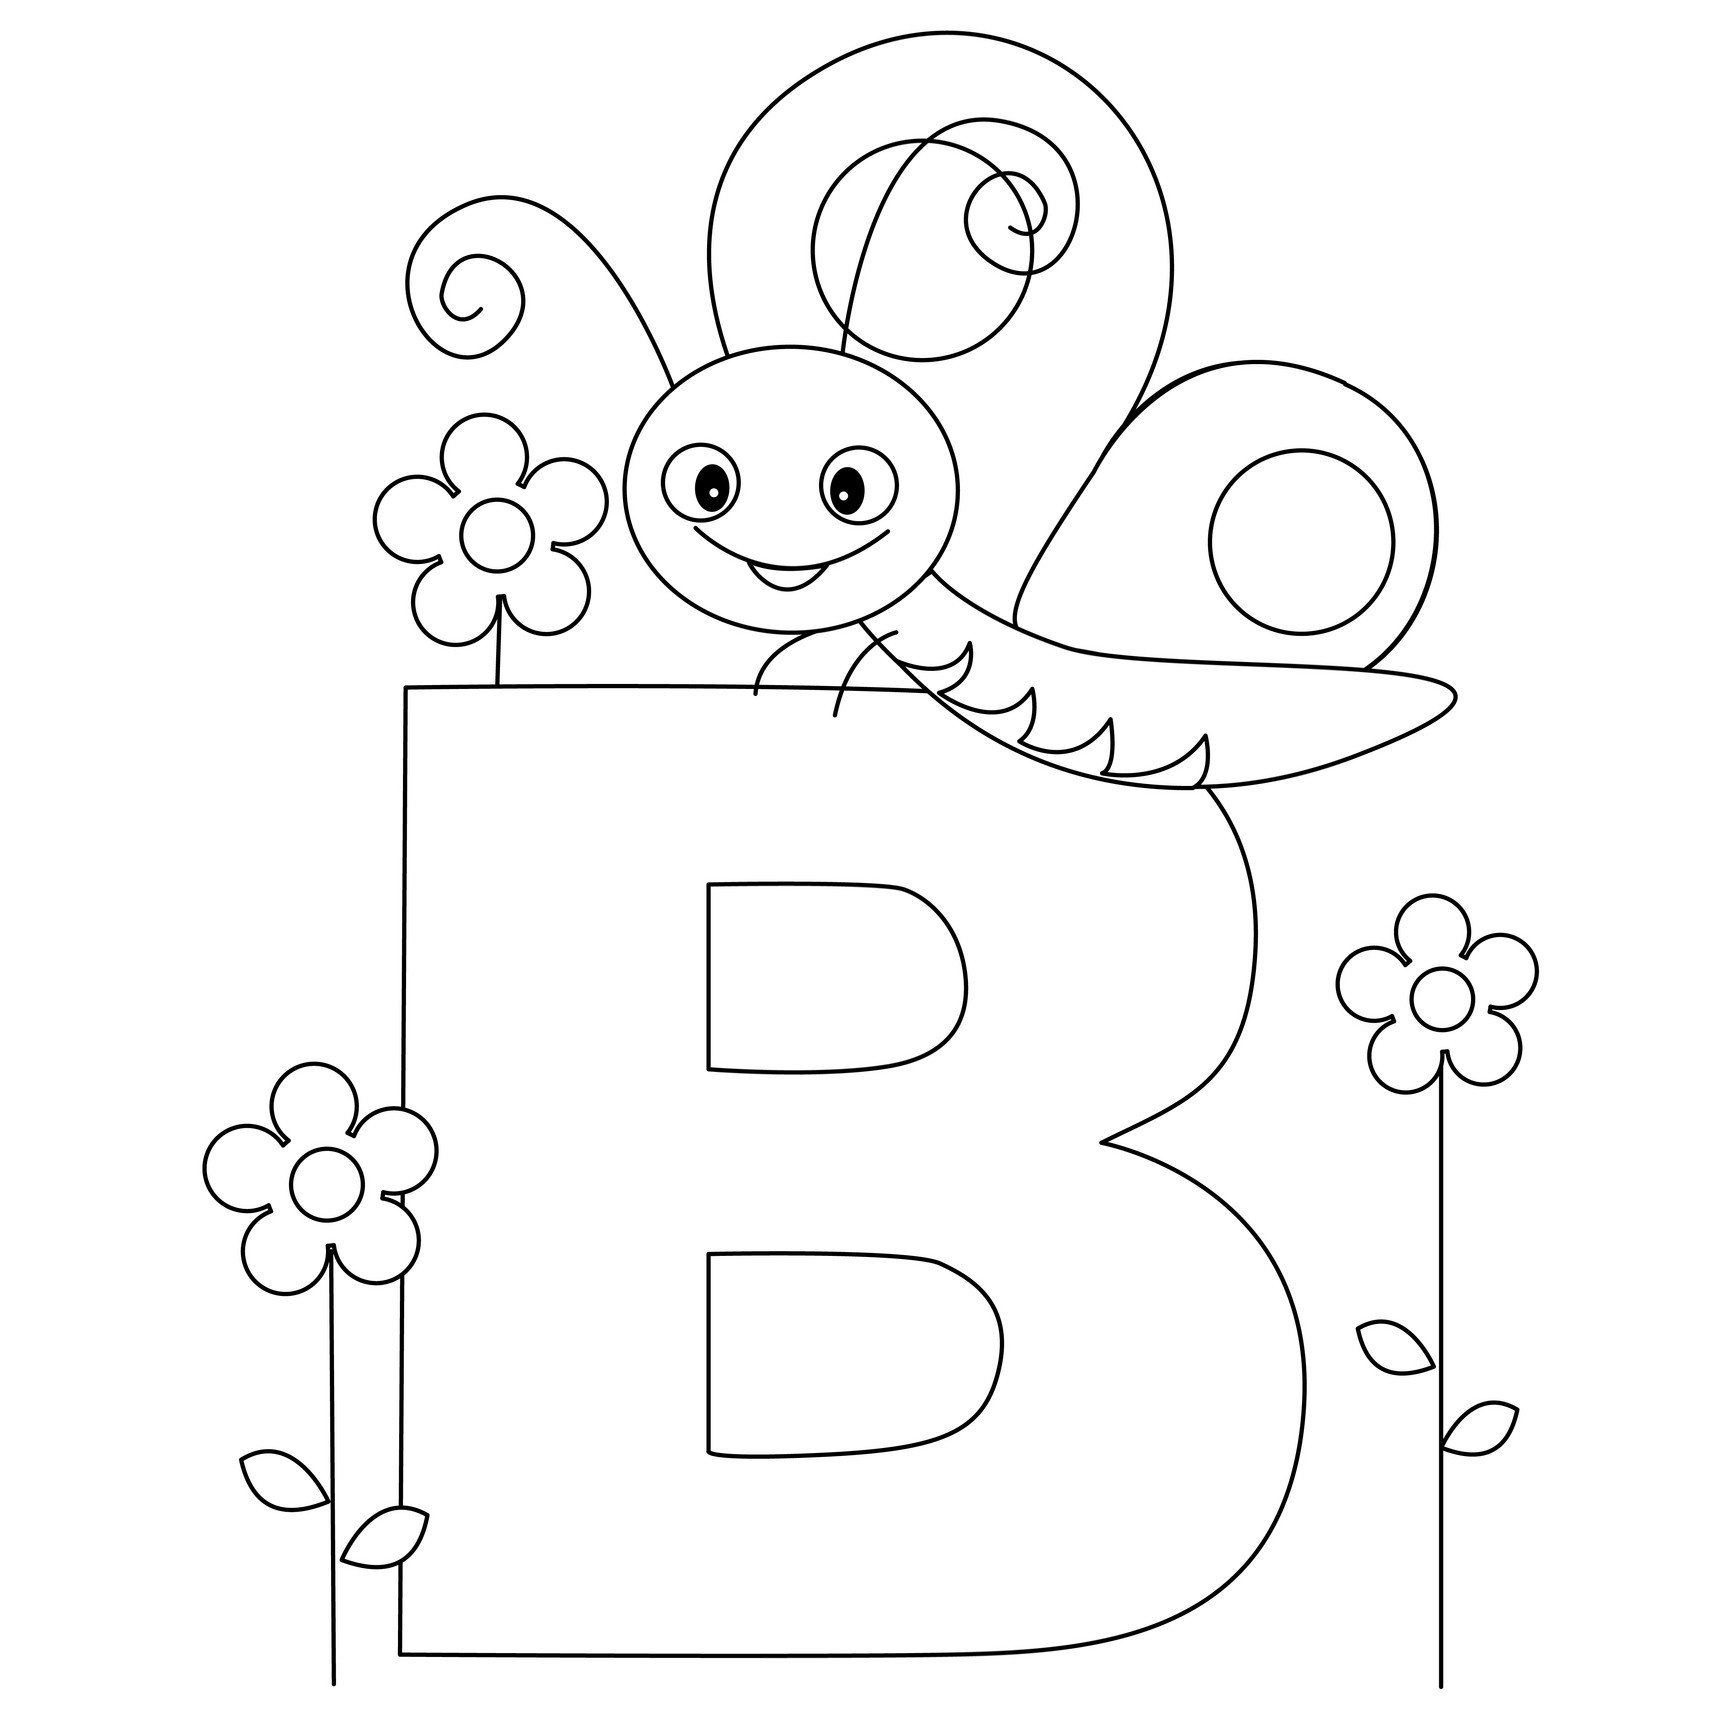 Alphabet Printable Coloring Pages | Presidencycollegekolkata - Free Printable Alphabet Coloring Pages